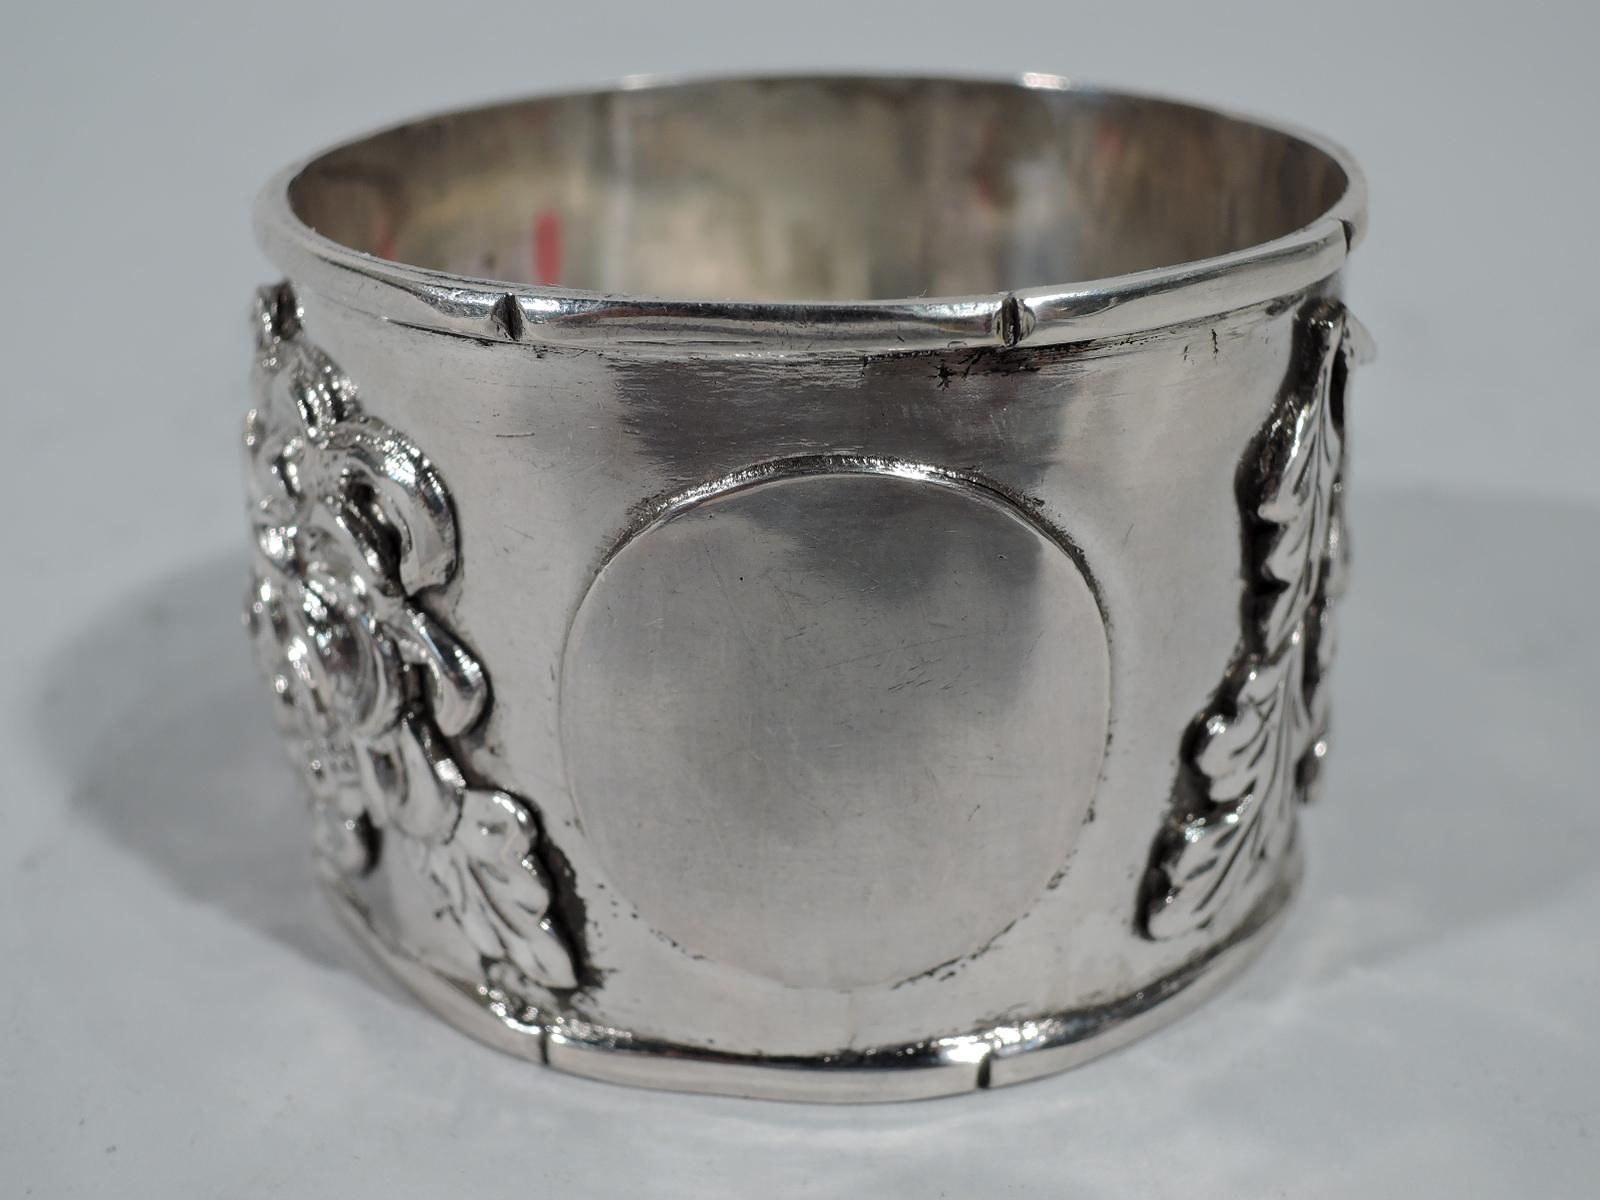 Chinese export silver napkin ring. Applied blossoming prunus branch between bamboo rims. Applied circular frame (vacant). Hallmarked. Weight: 1.7 troy ounces.